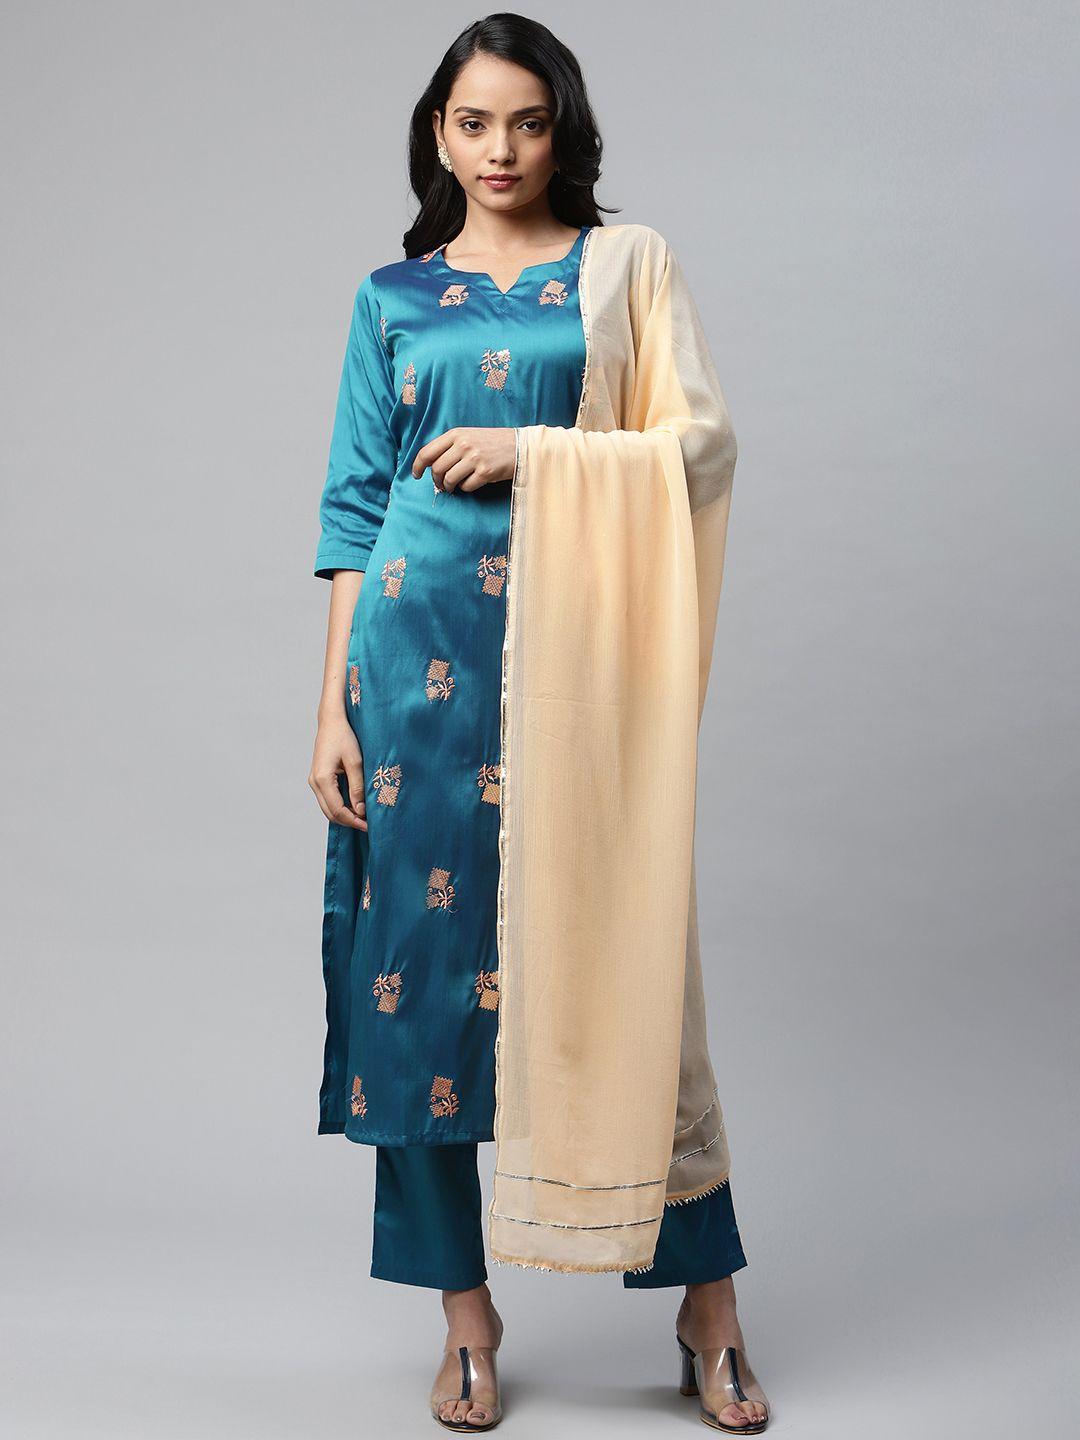 v-tradition-women-blue-floral-embroidered-kurta-with-palazzos-&-with-dupatta